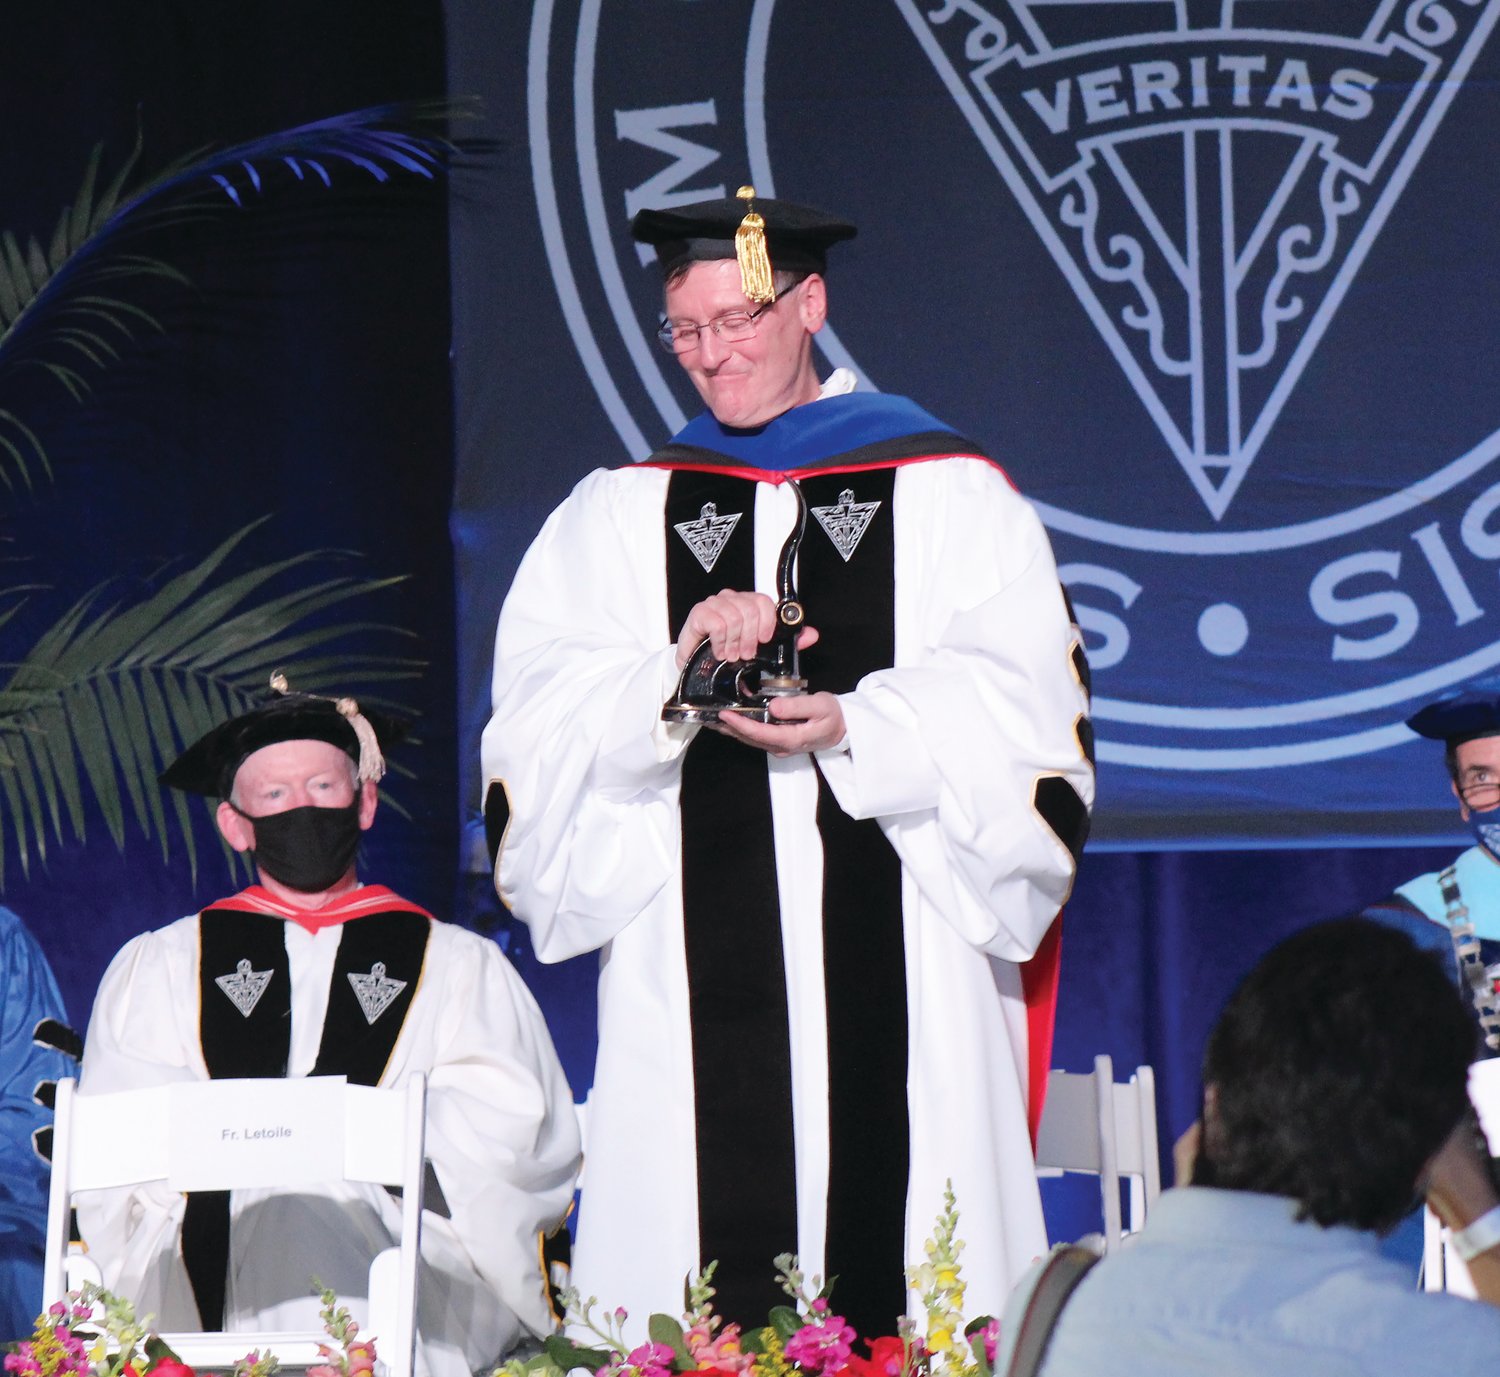 Father Kenneth R. Sicard, O.P., was inaugurated as the 13th President of Providence College on Friday, Oct. 1, during a formal ceremony.